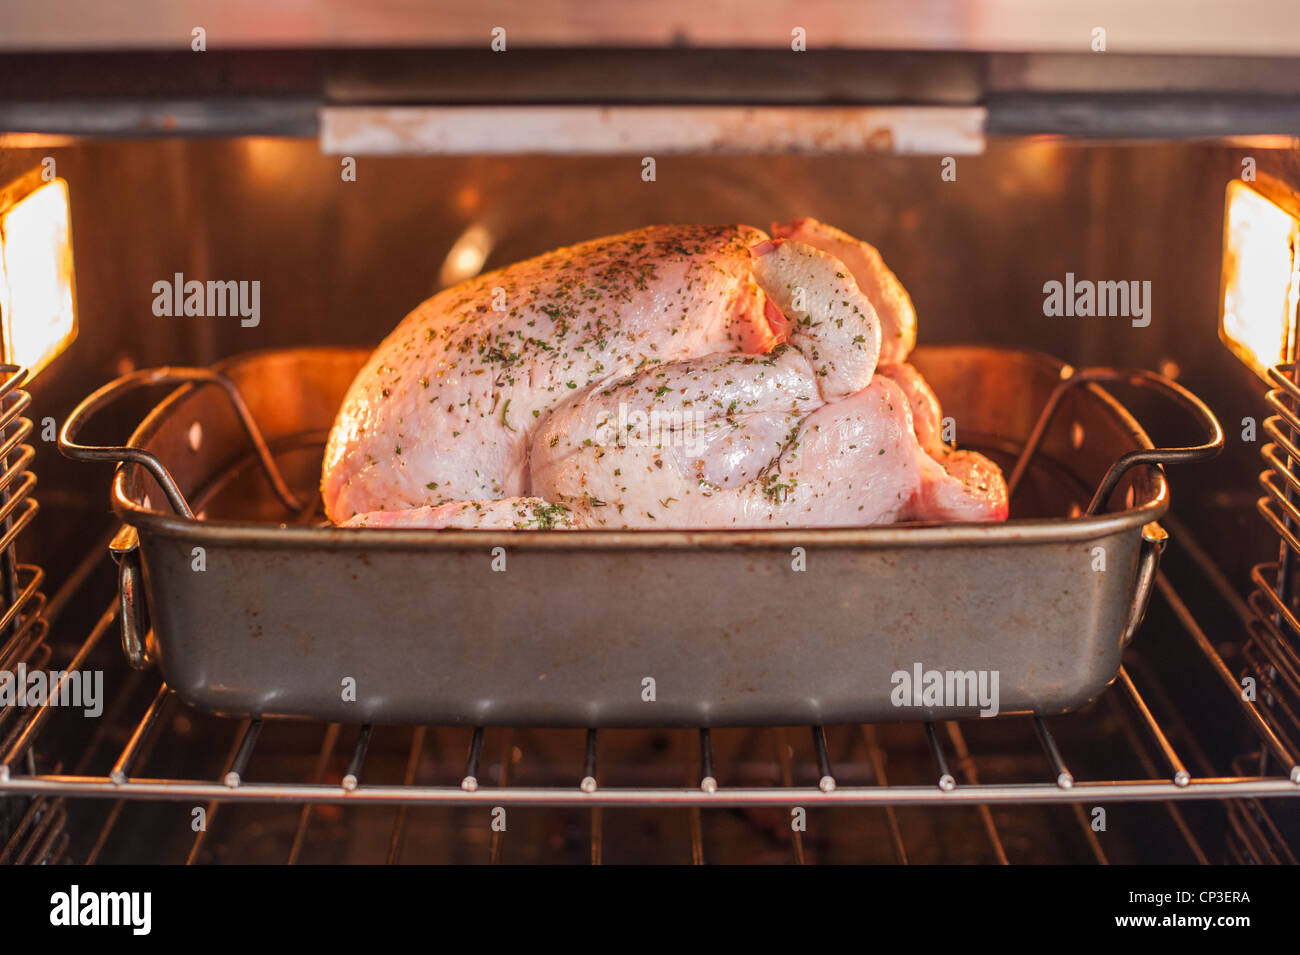 https://c8.alamy.com/comp/CP3ERA/a-roast-chicken-being-cooked-in-the-oven-CP3ERA.jpg